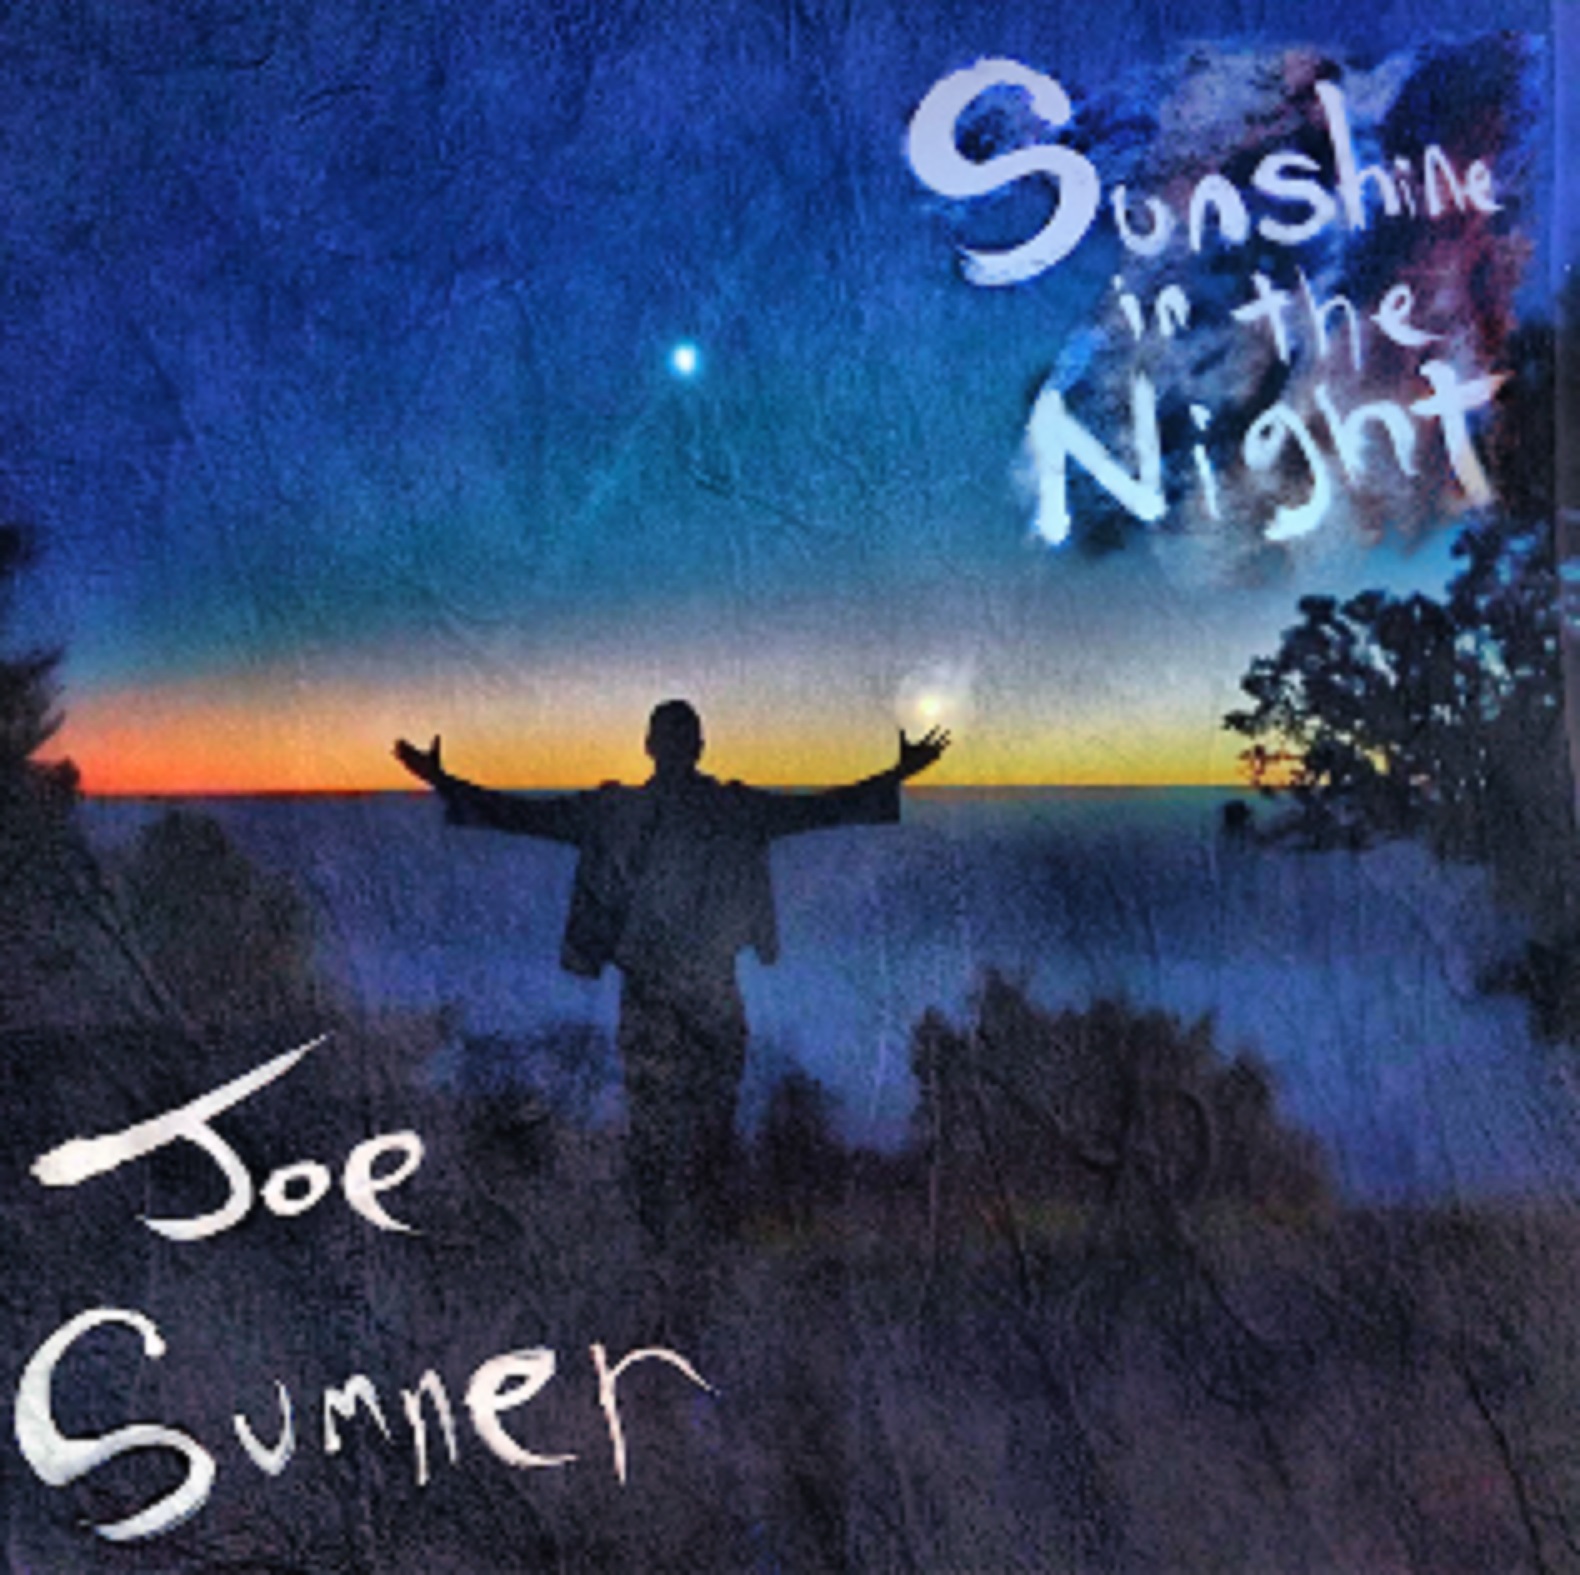 Joe Sumner Set To Release Debut Album, "Sunshine In The Night" on 10/6 - North American Tour Dates Announced